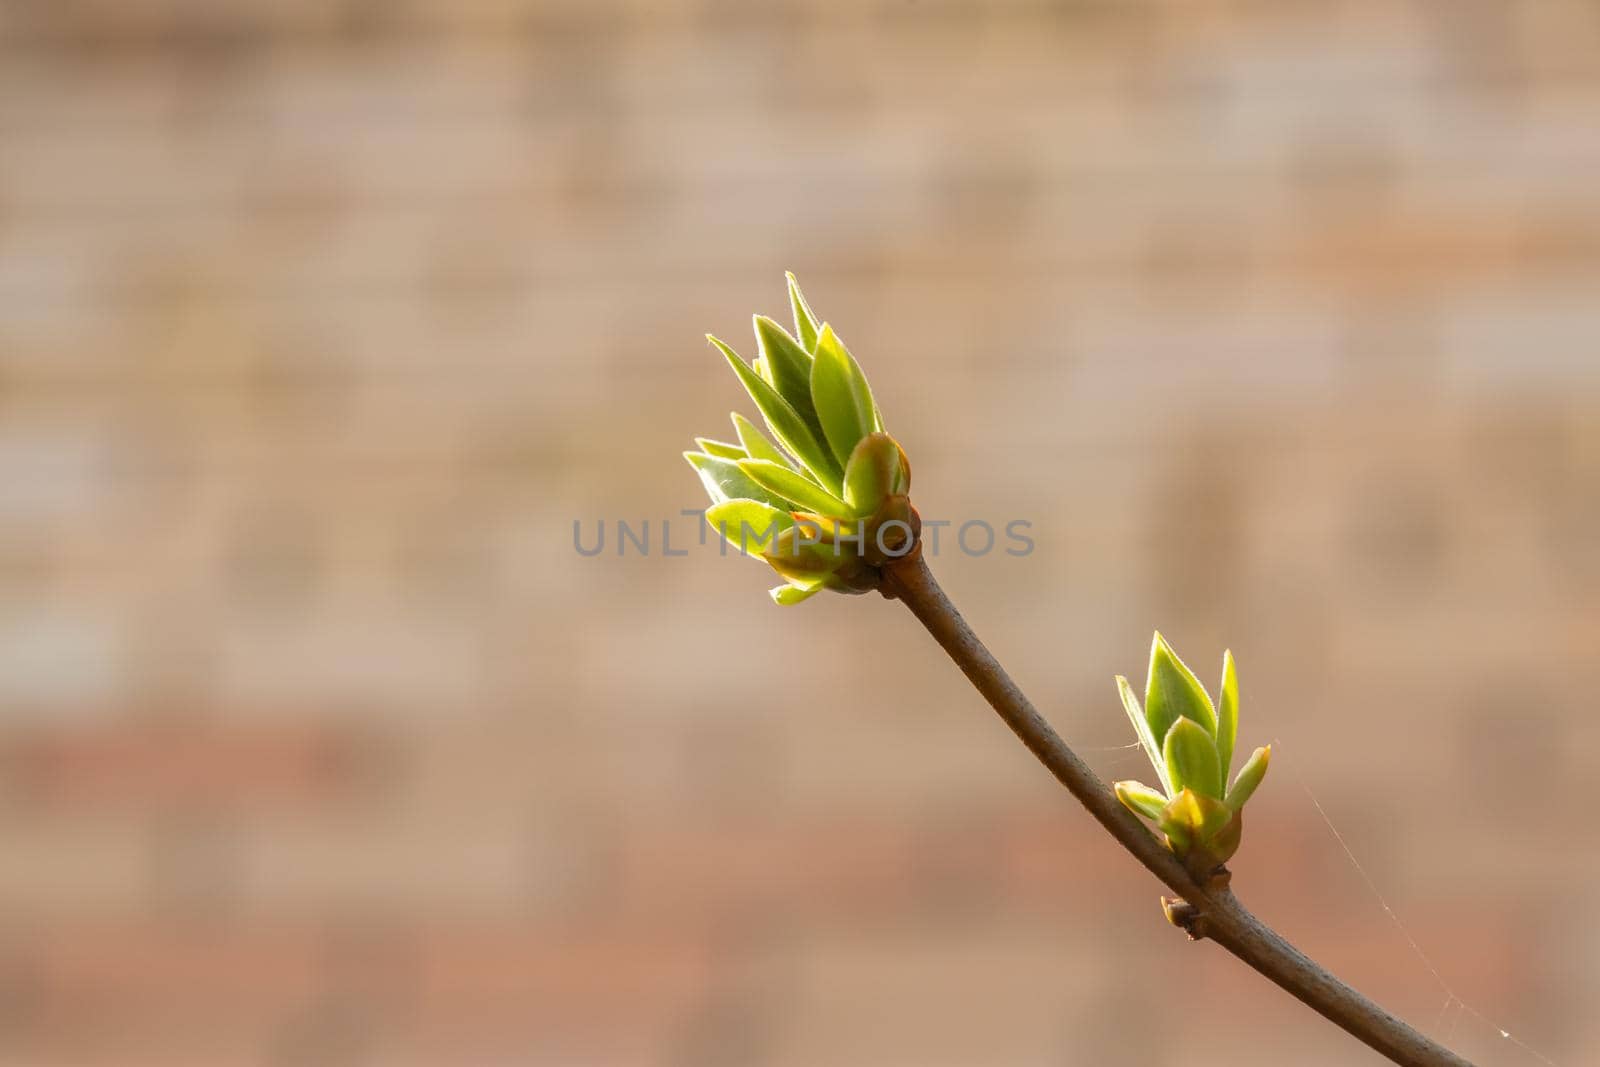 Lilac buds on a branch in early spring with sun exposure horizontal format by galinasharapova